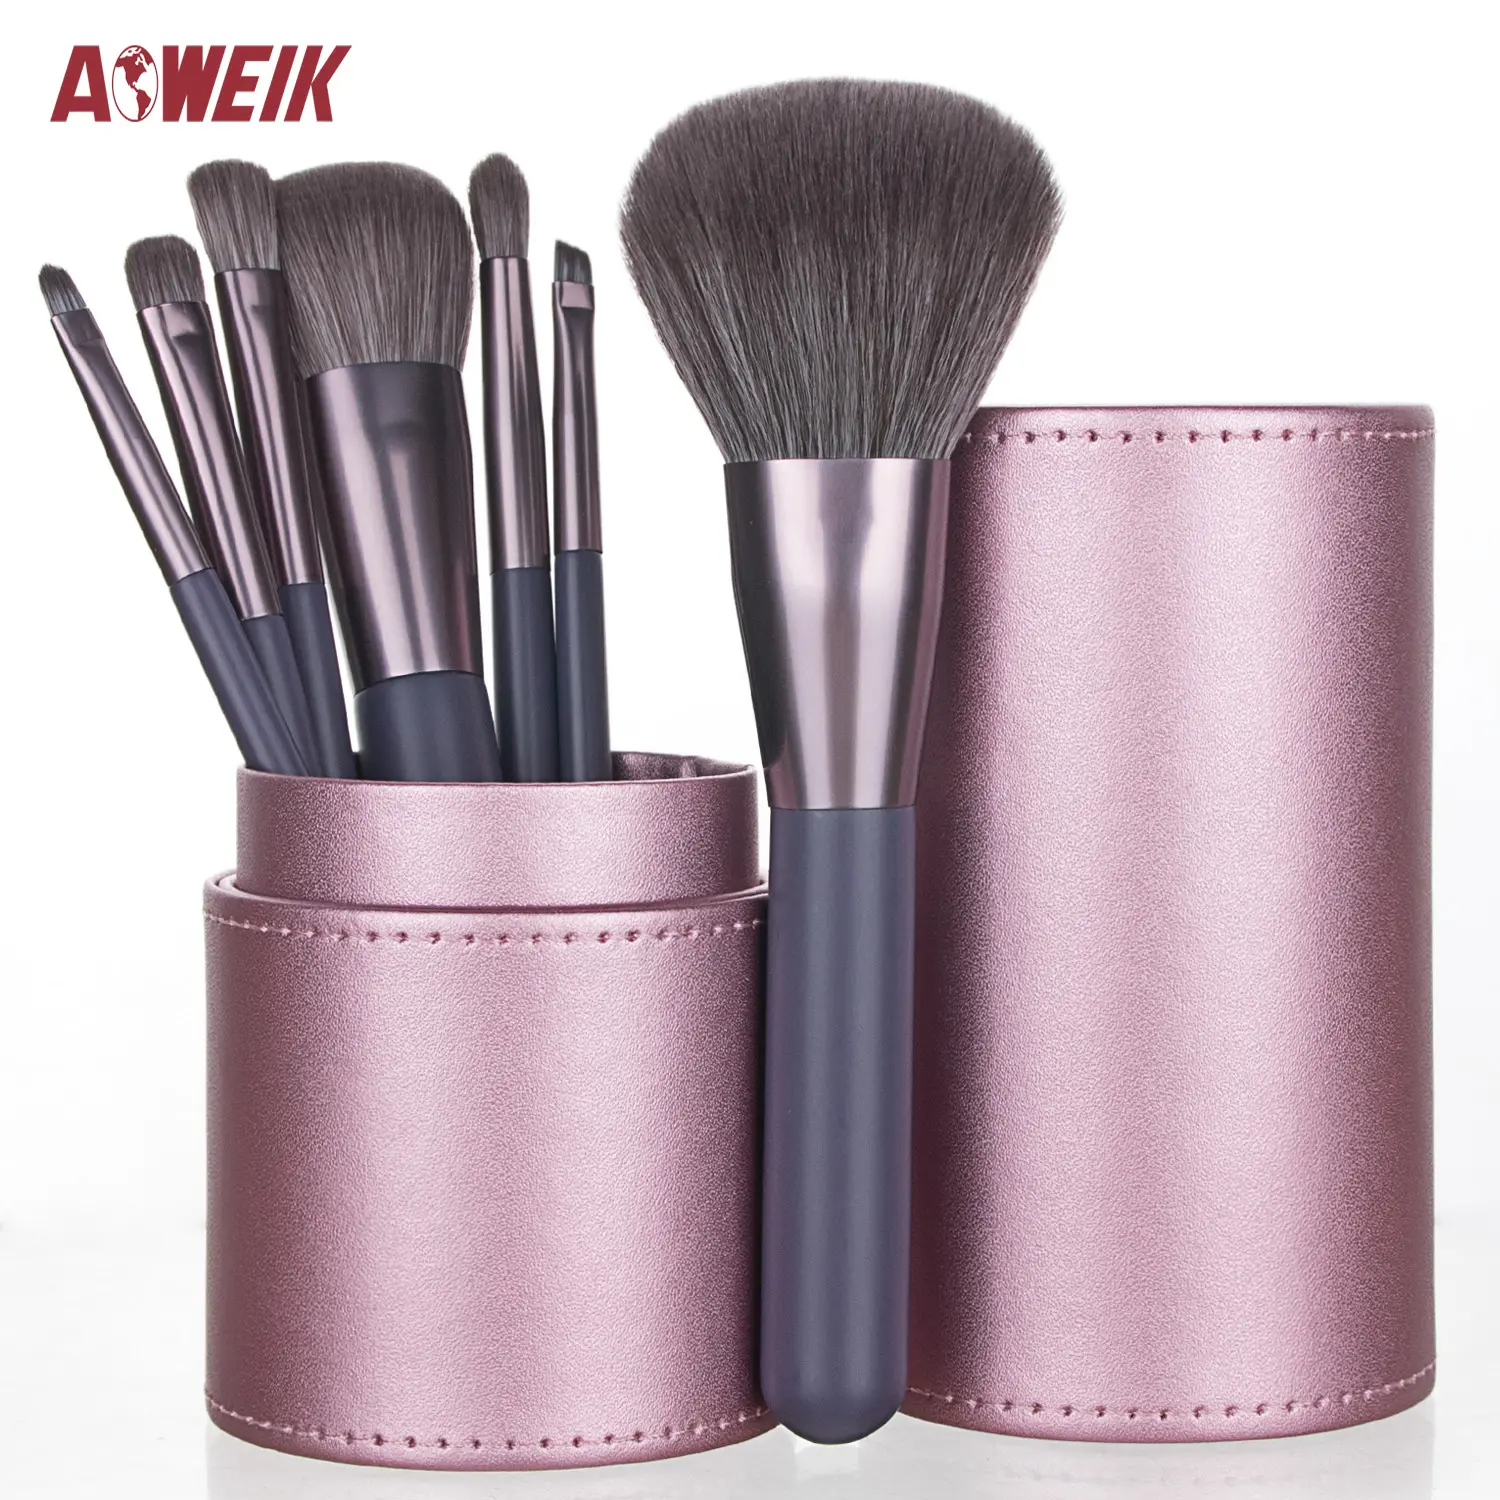 AWK Purple Top Quality Makeup Brush Set With Box For Concealer